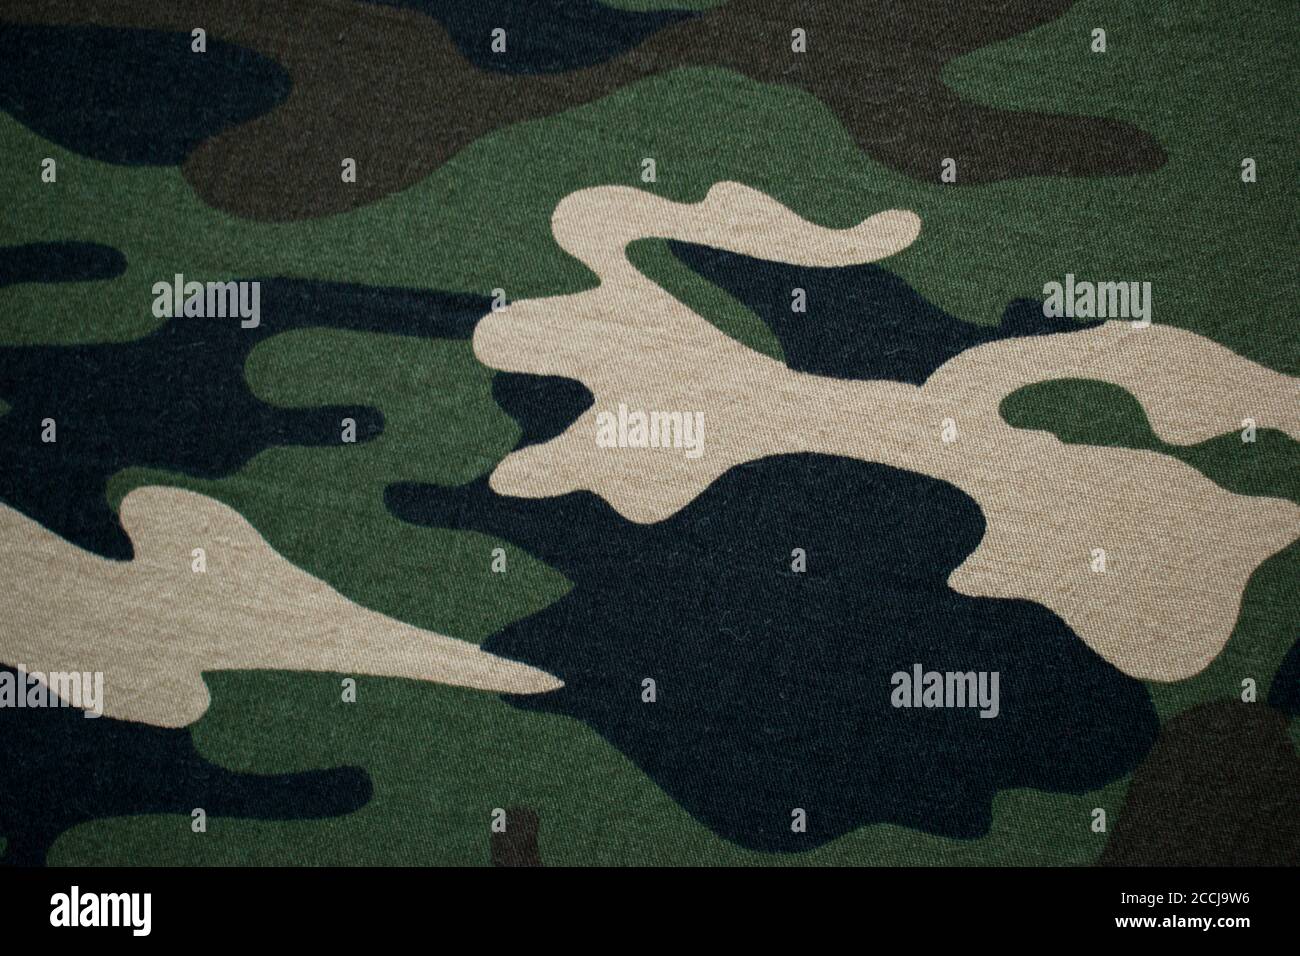 Military camouflage fabric, cloth background Stock Photo